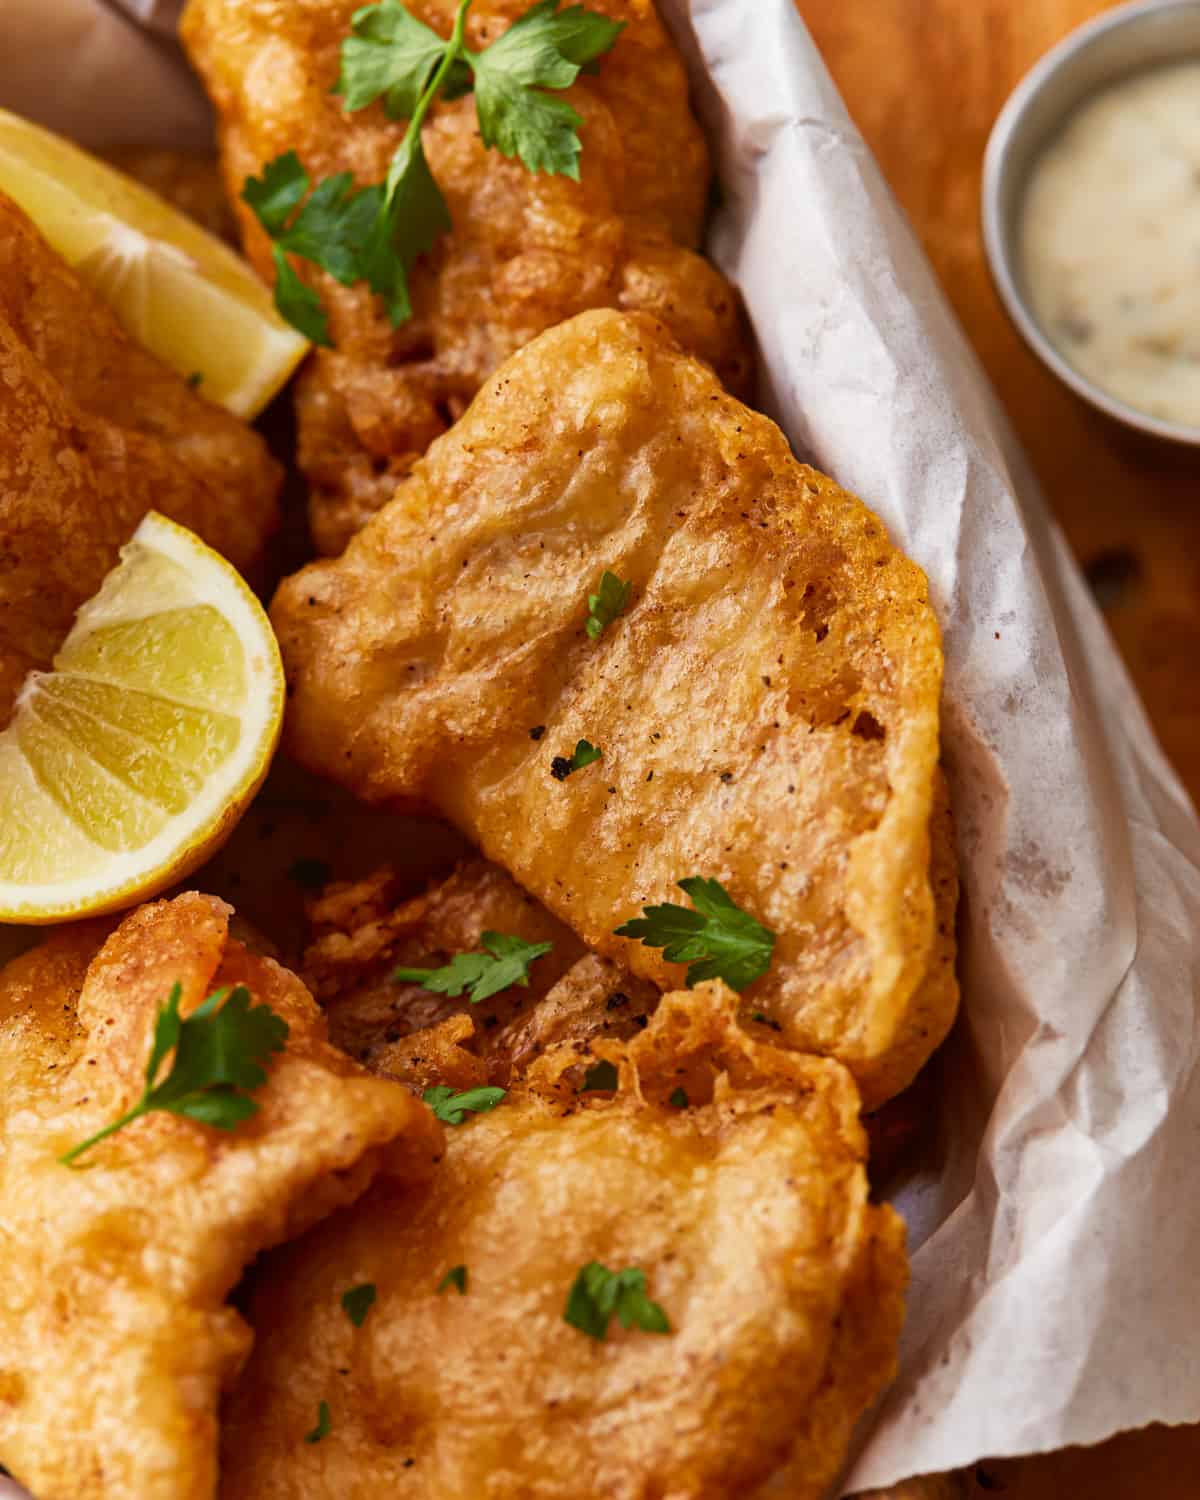 Beer-battered fried fish with lemon wedges and dipping sauce.